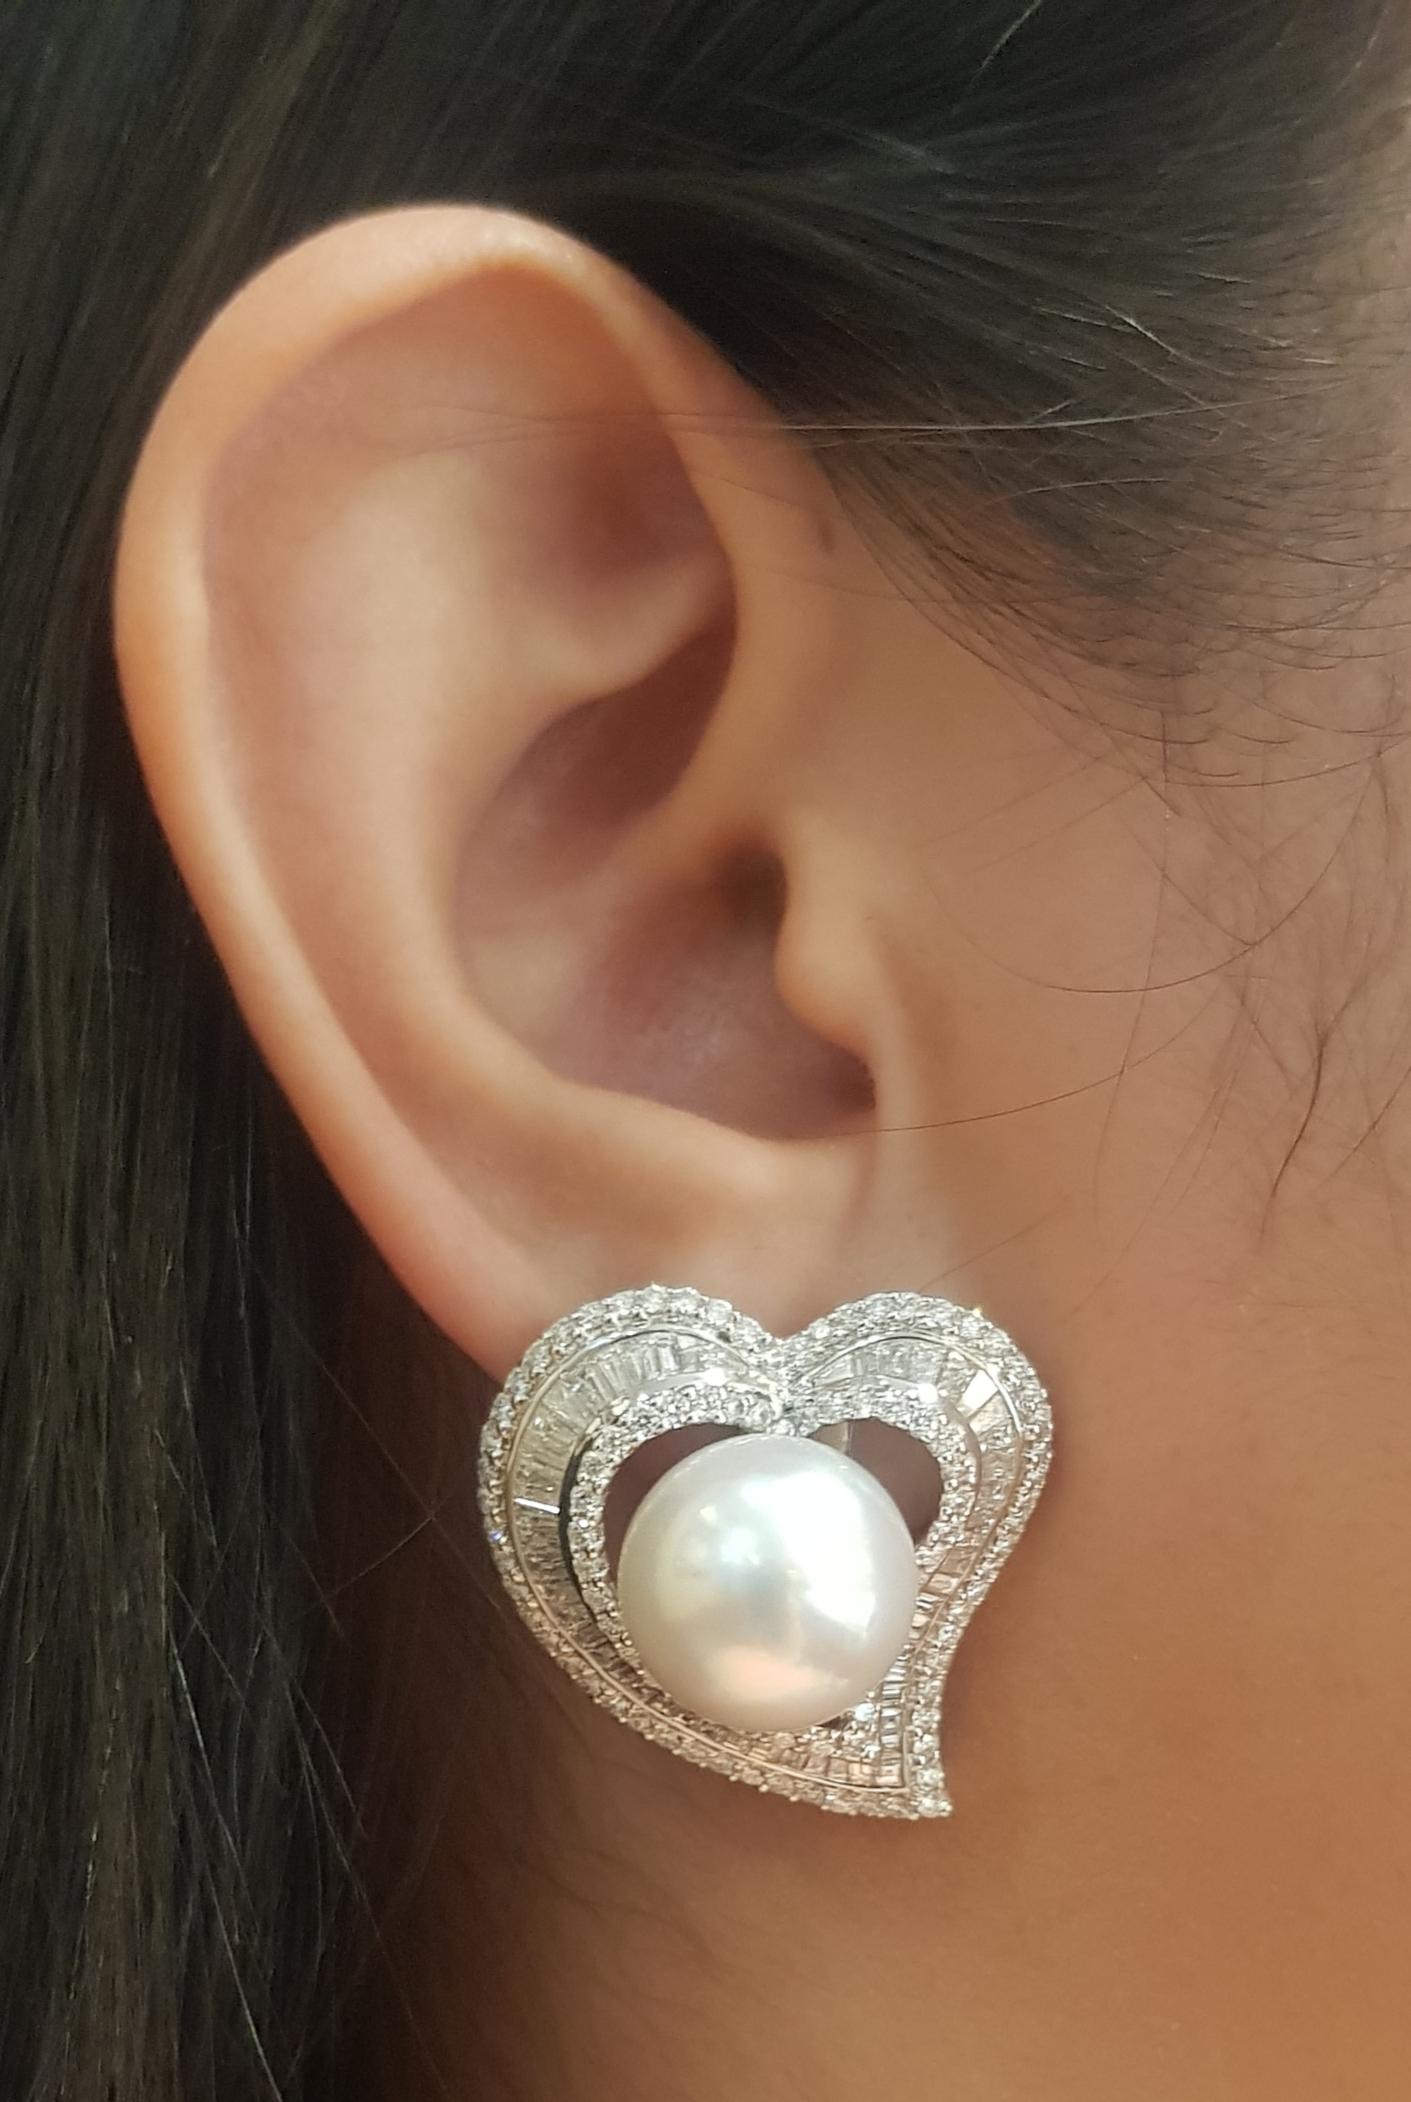 South Sea Pearl and Diamond 3.32 carats Earrings set in18K White Gold Settings

Width: 2.7 cm 
Length: 2.9 cm
Total Weight: 21.78 grams

